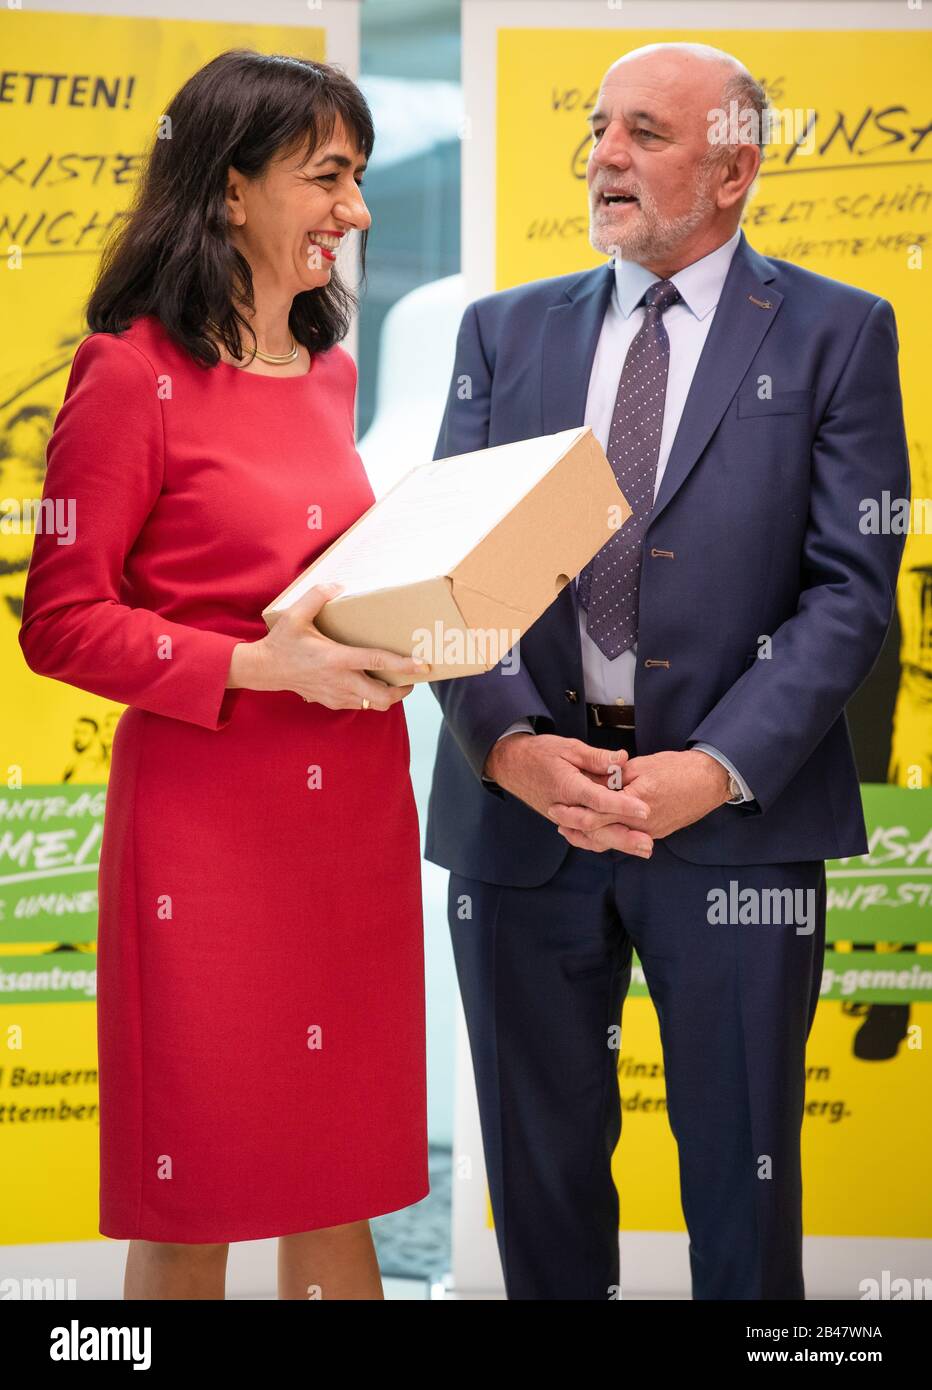 06 March 2020, Baden-Wuerttemberg, Stuttgart: Muhterem Aras (l, Bündnis 90/Die Grünen), President of the State Parliament, receives the petition for a referendum 'Protecting our environment together in Baden-Württemberg' from Werner Räpple, President of the Baden Agricultural Association (BLHV). The farmers' associations collected around 90,000 signatures for their petition in response to the petition for a referendum on greater species protection. Photo: Christoph Schmidt/dpa Stock Photo